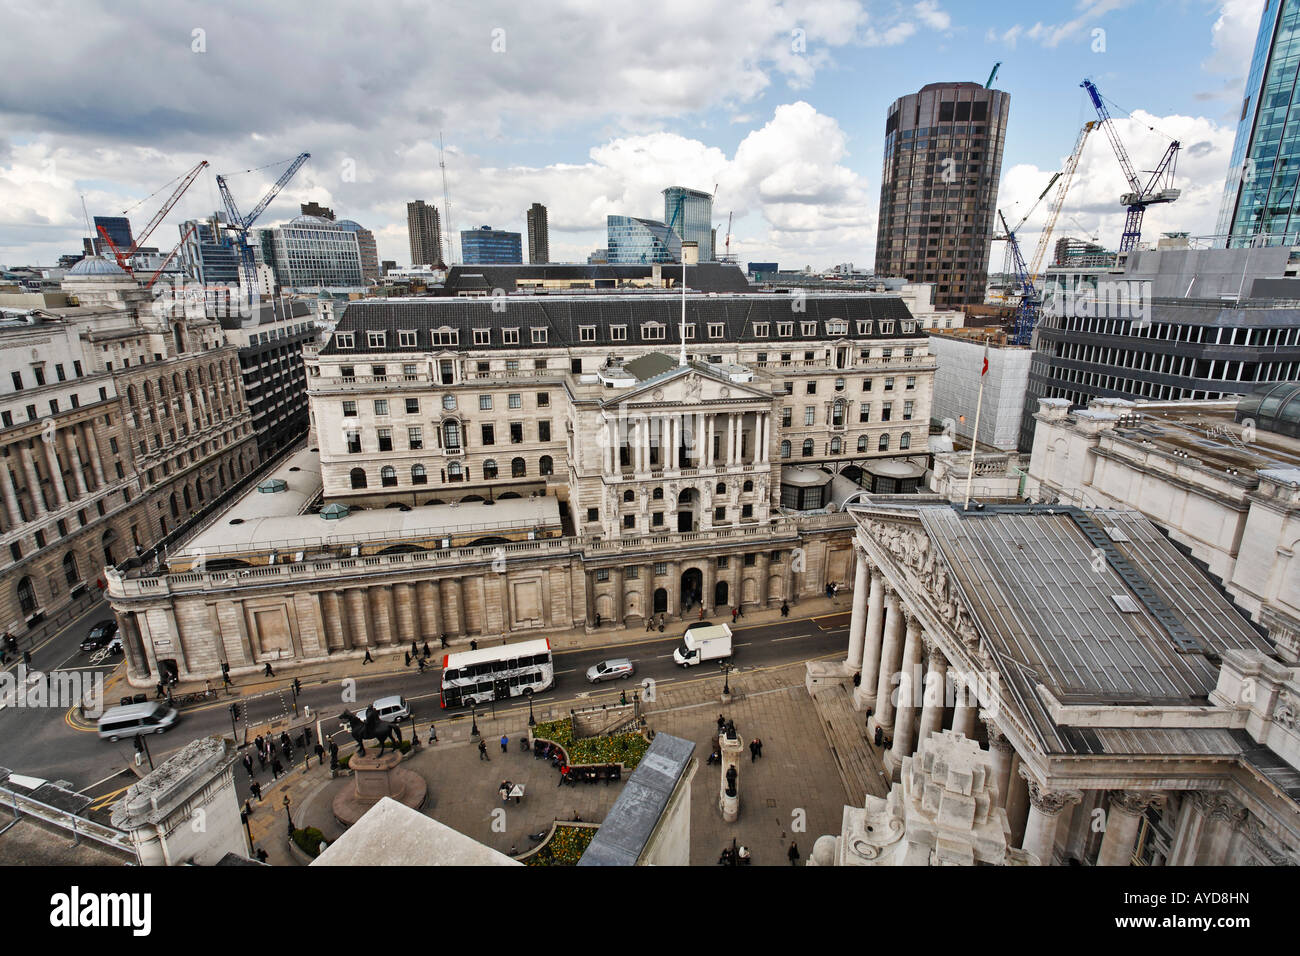 The Bank of England in the city landscape. Stock Photo